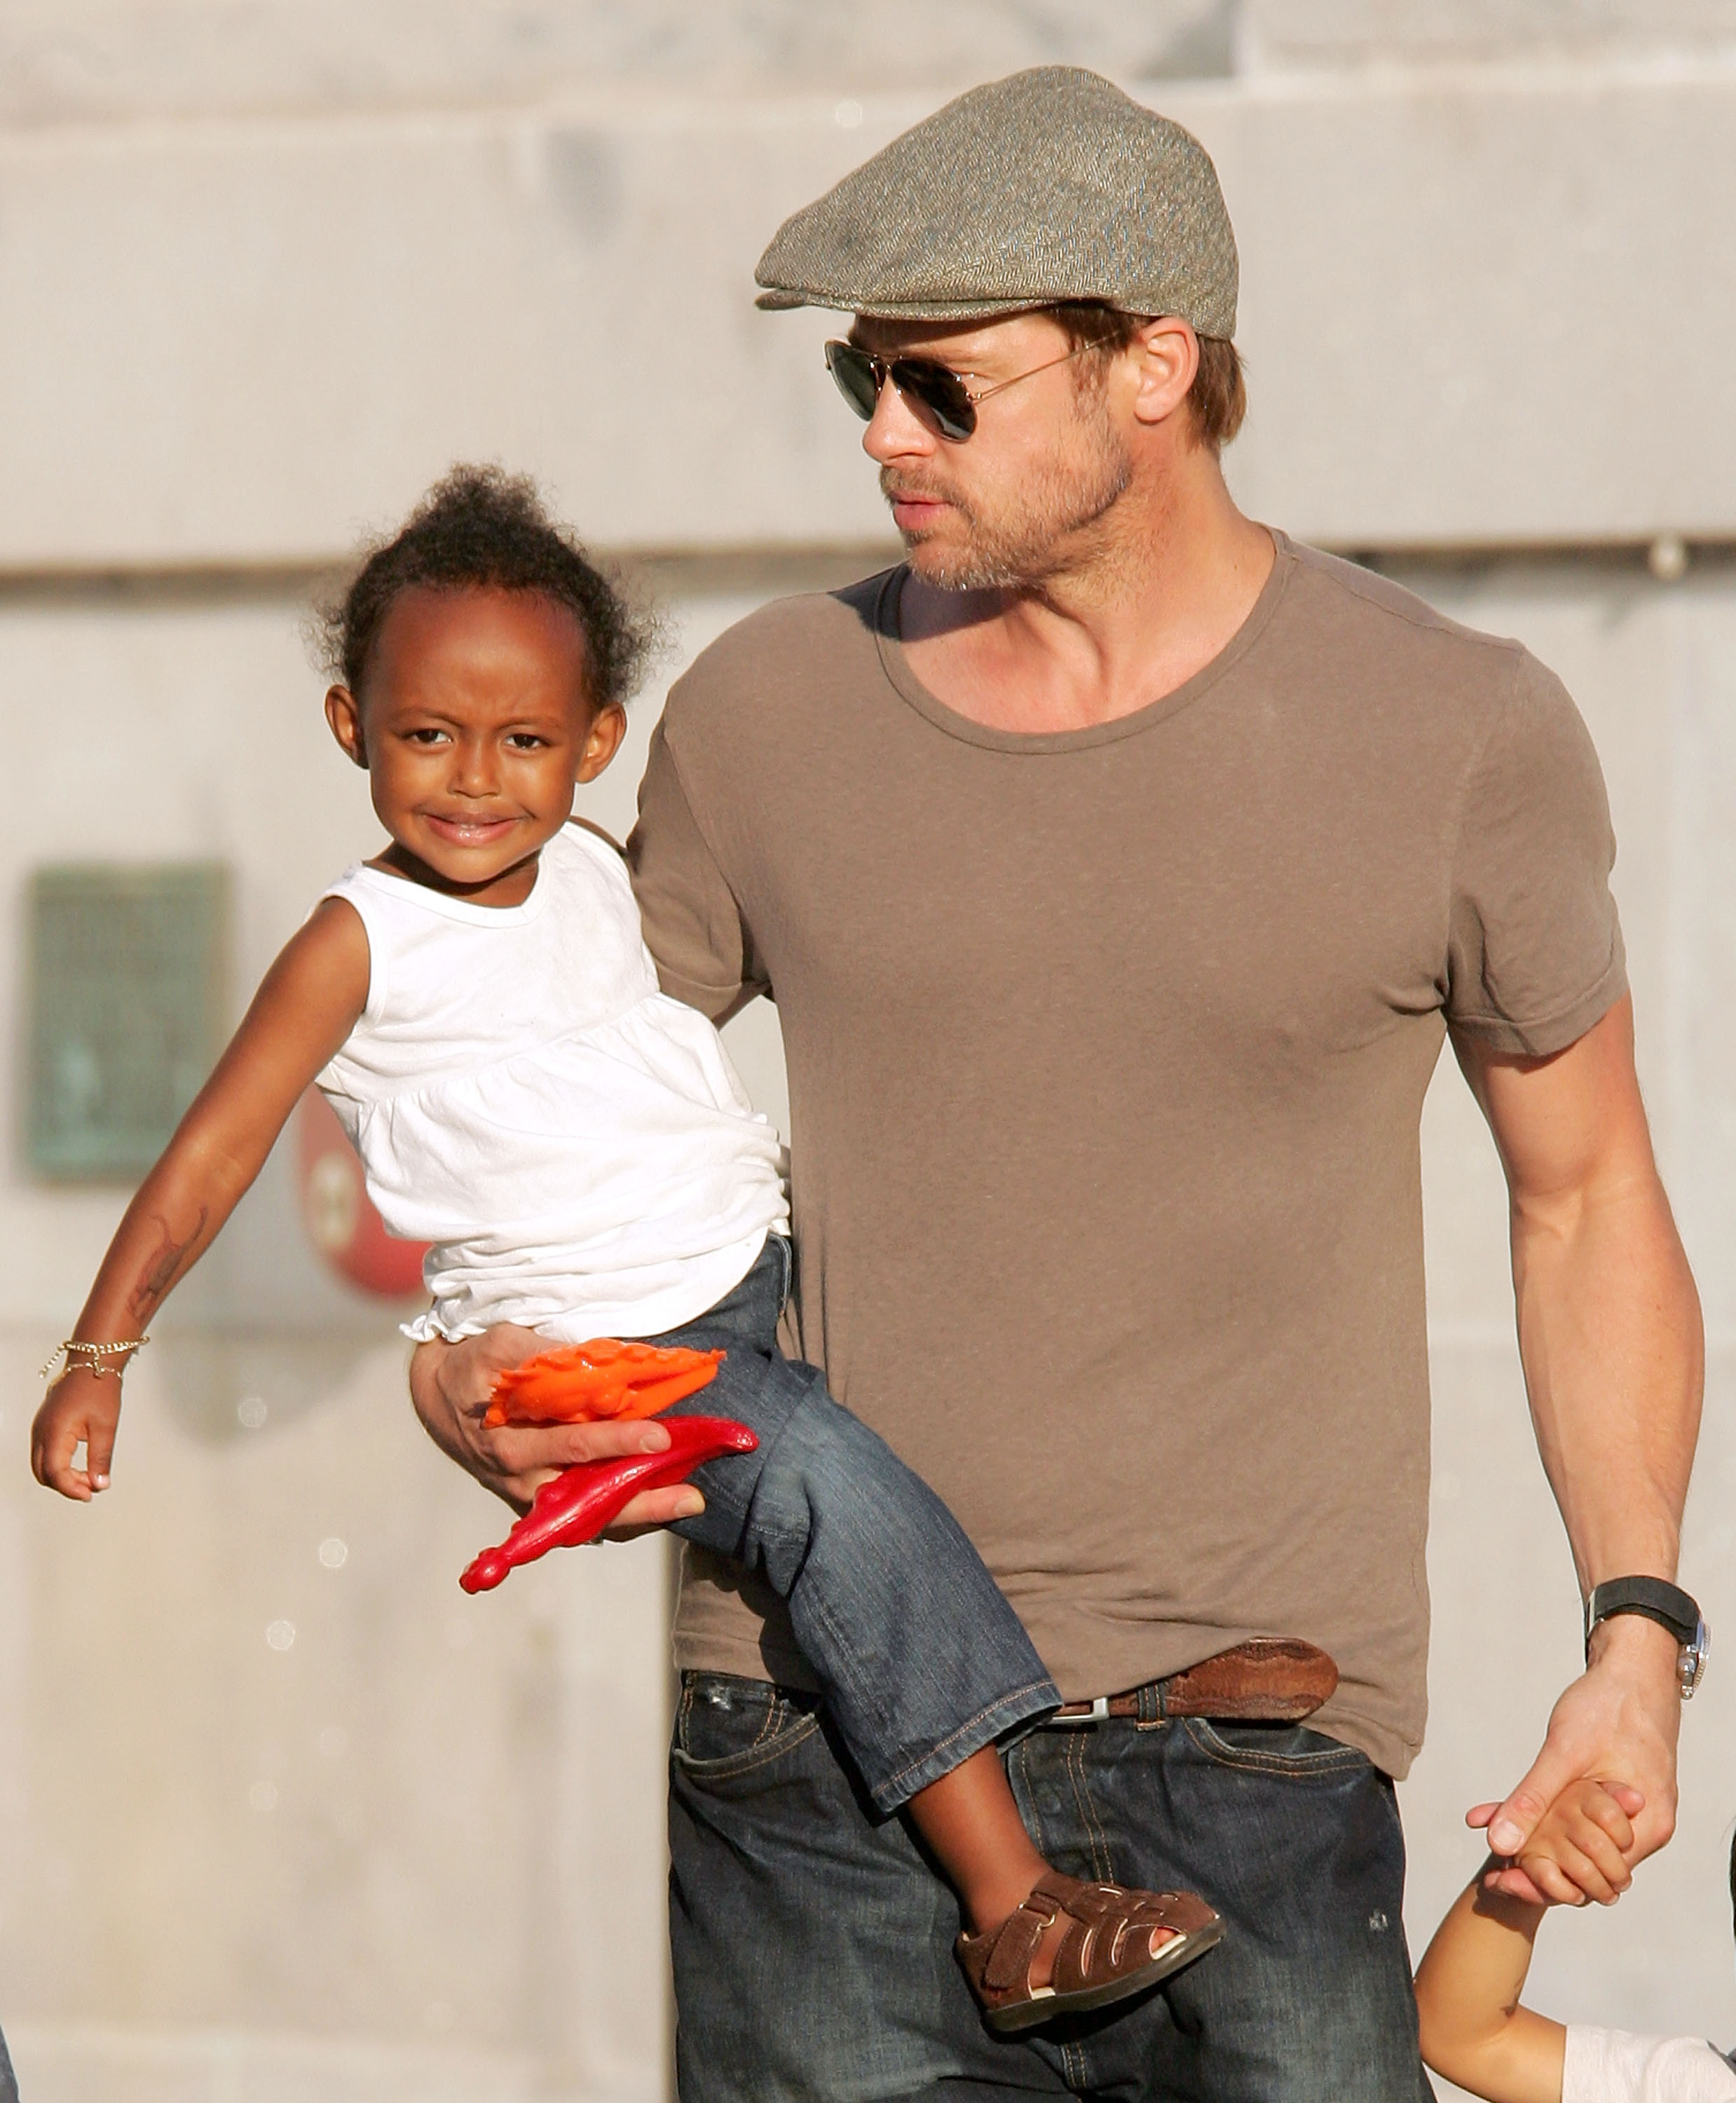 Brad Pitt and Zahara Jolie Pitt visit The Field Museum in Chicago on August 11, 2007. | Source: Getty Images